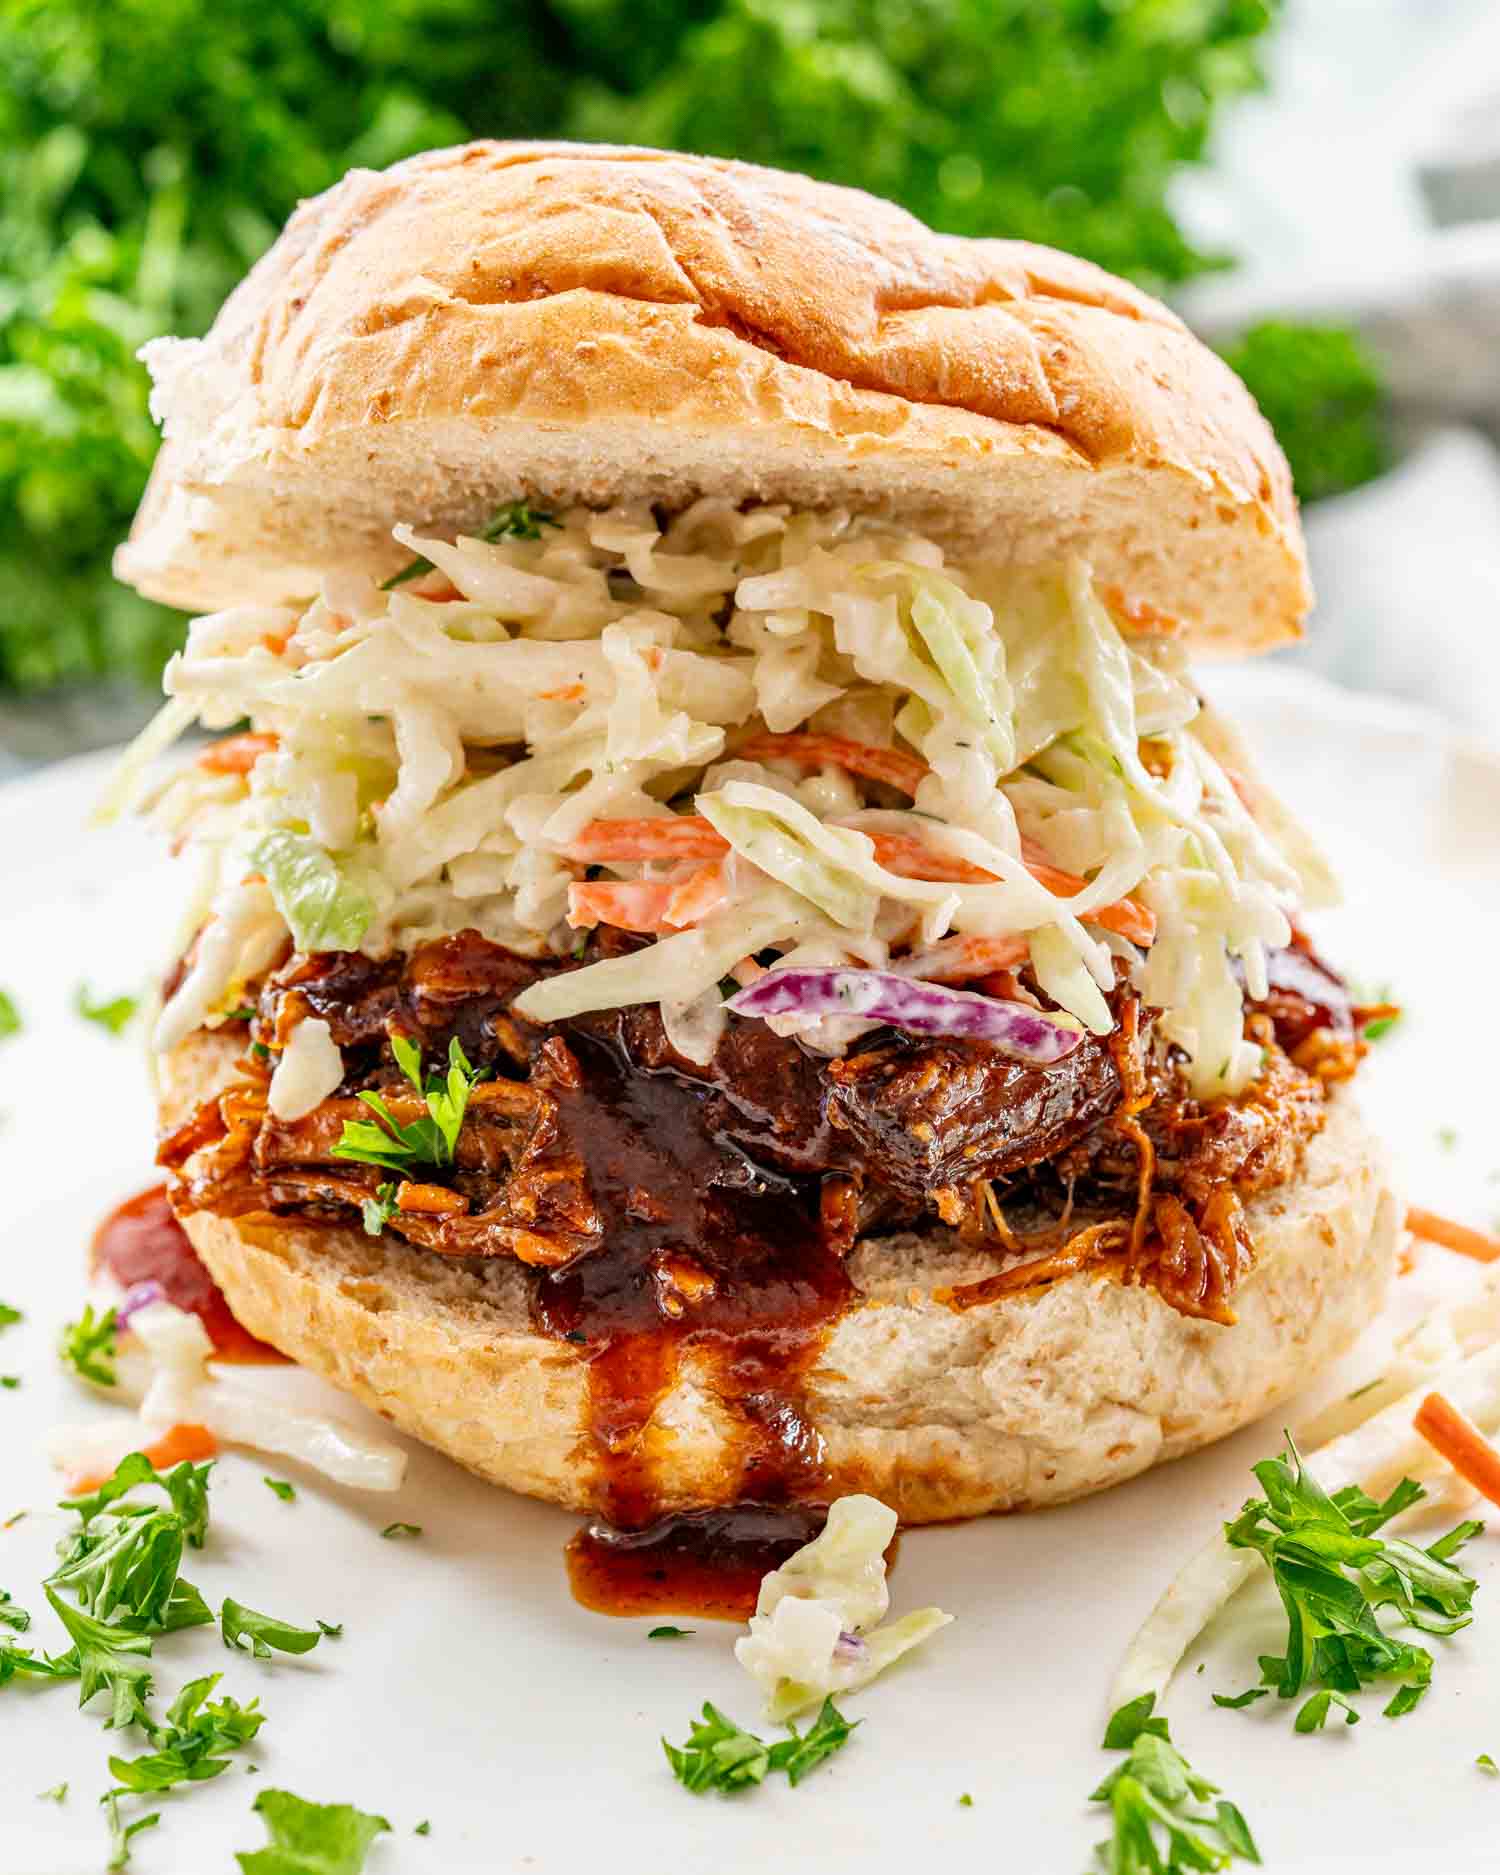 a pulled pork sandwich on a bun with lots of coleslaw and bbq sauce.